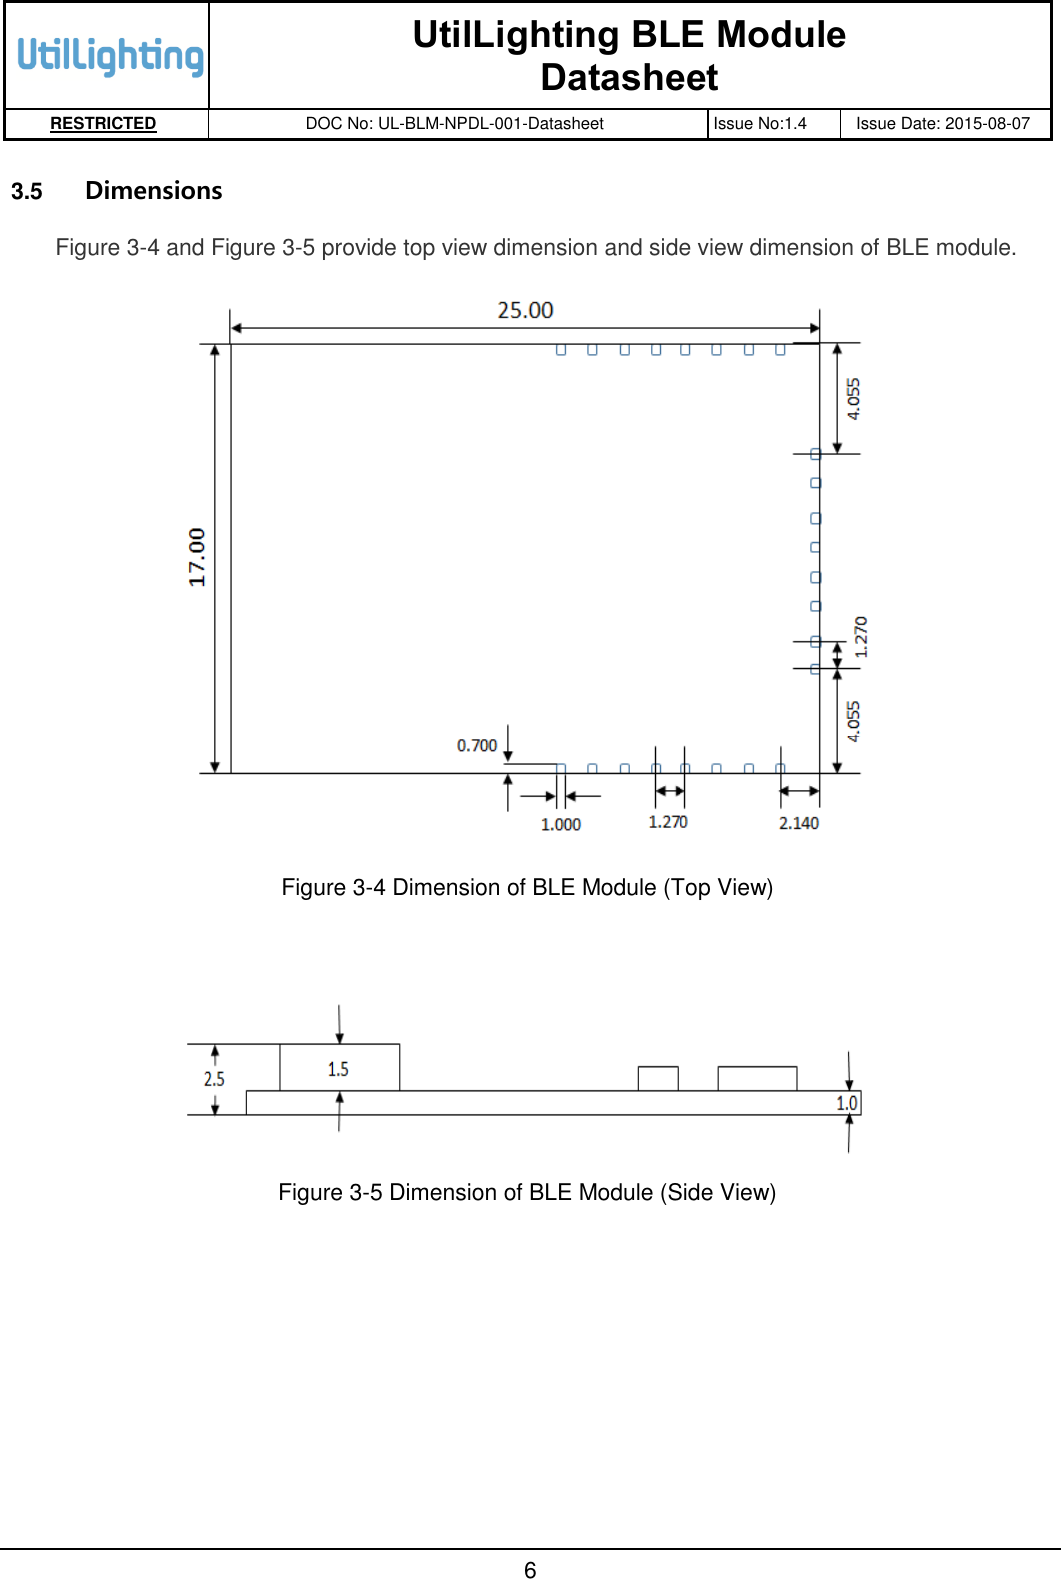   UtilLighting BLE Module Datasheet RESTRICTED DOC No: UL-BLM-NPDL-001-Datasheet Issue No:1.4 Issue Date: 2015-08-07       6  3.5  Dimensions Figure 3-4 and Figure 3-5 provide top view dimension and side view dimension of BLE module.   Figure 3-4 Dimension of BLE Module (Top View)     Figure 3-5 Dimension of BLE Module (Side View)  